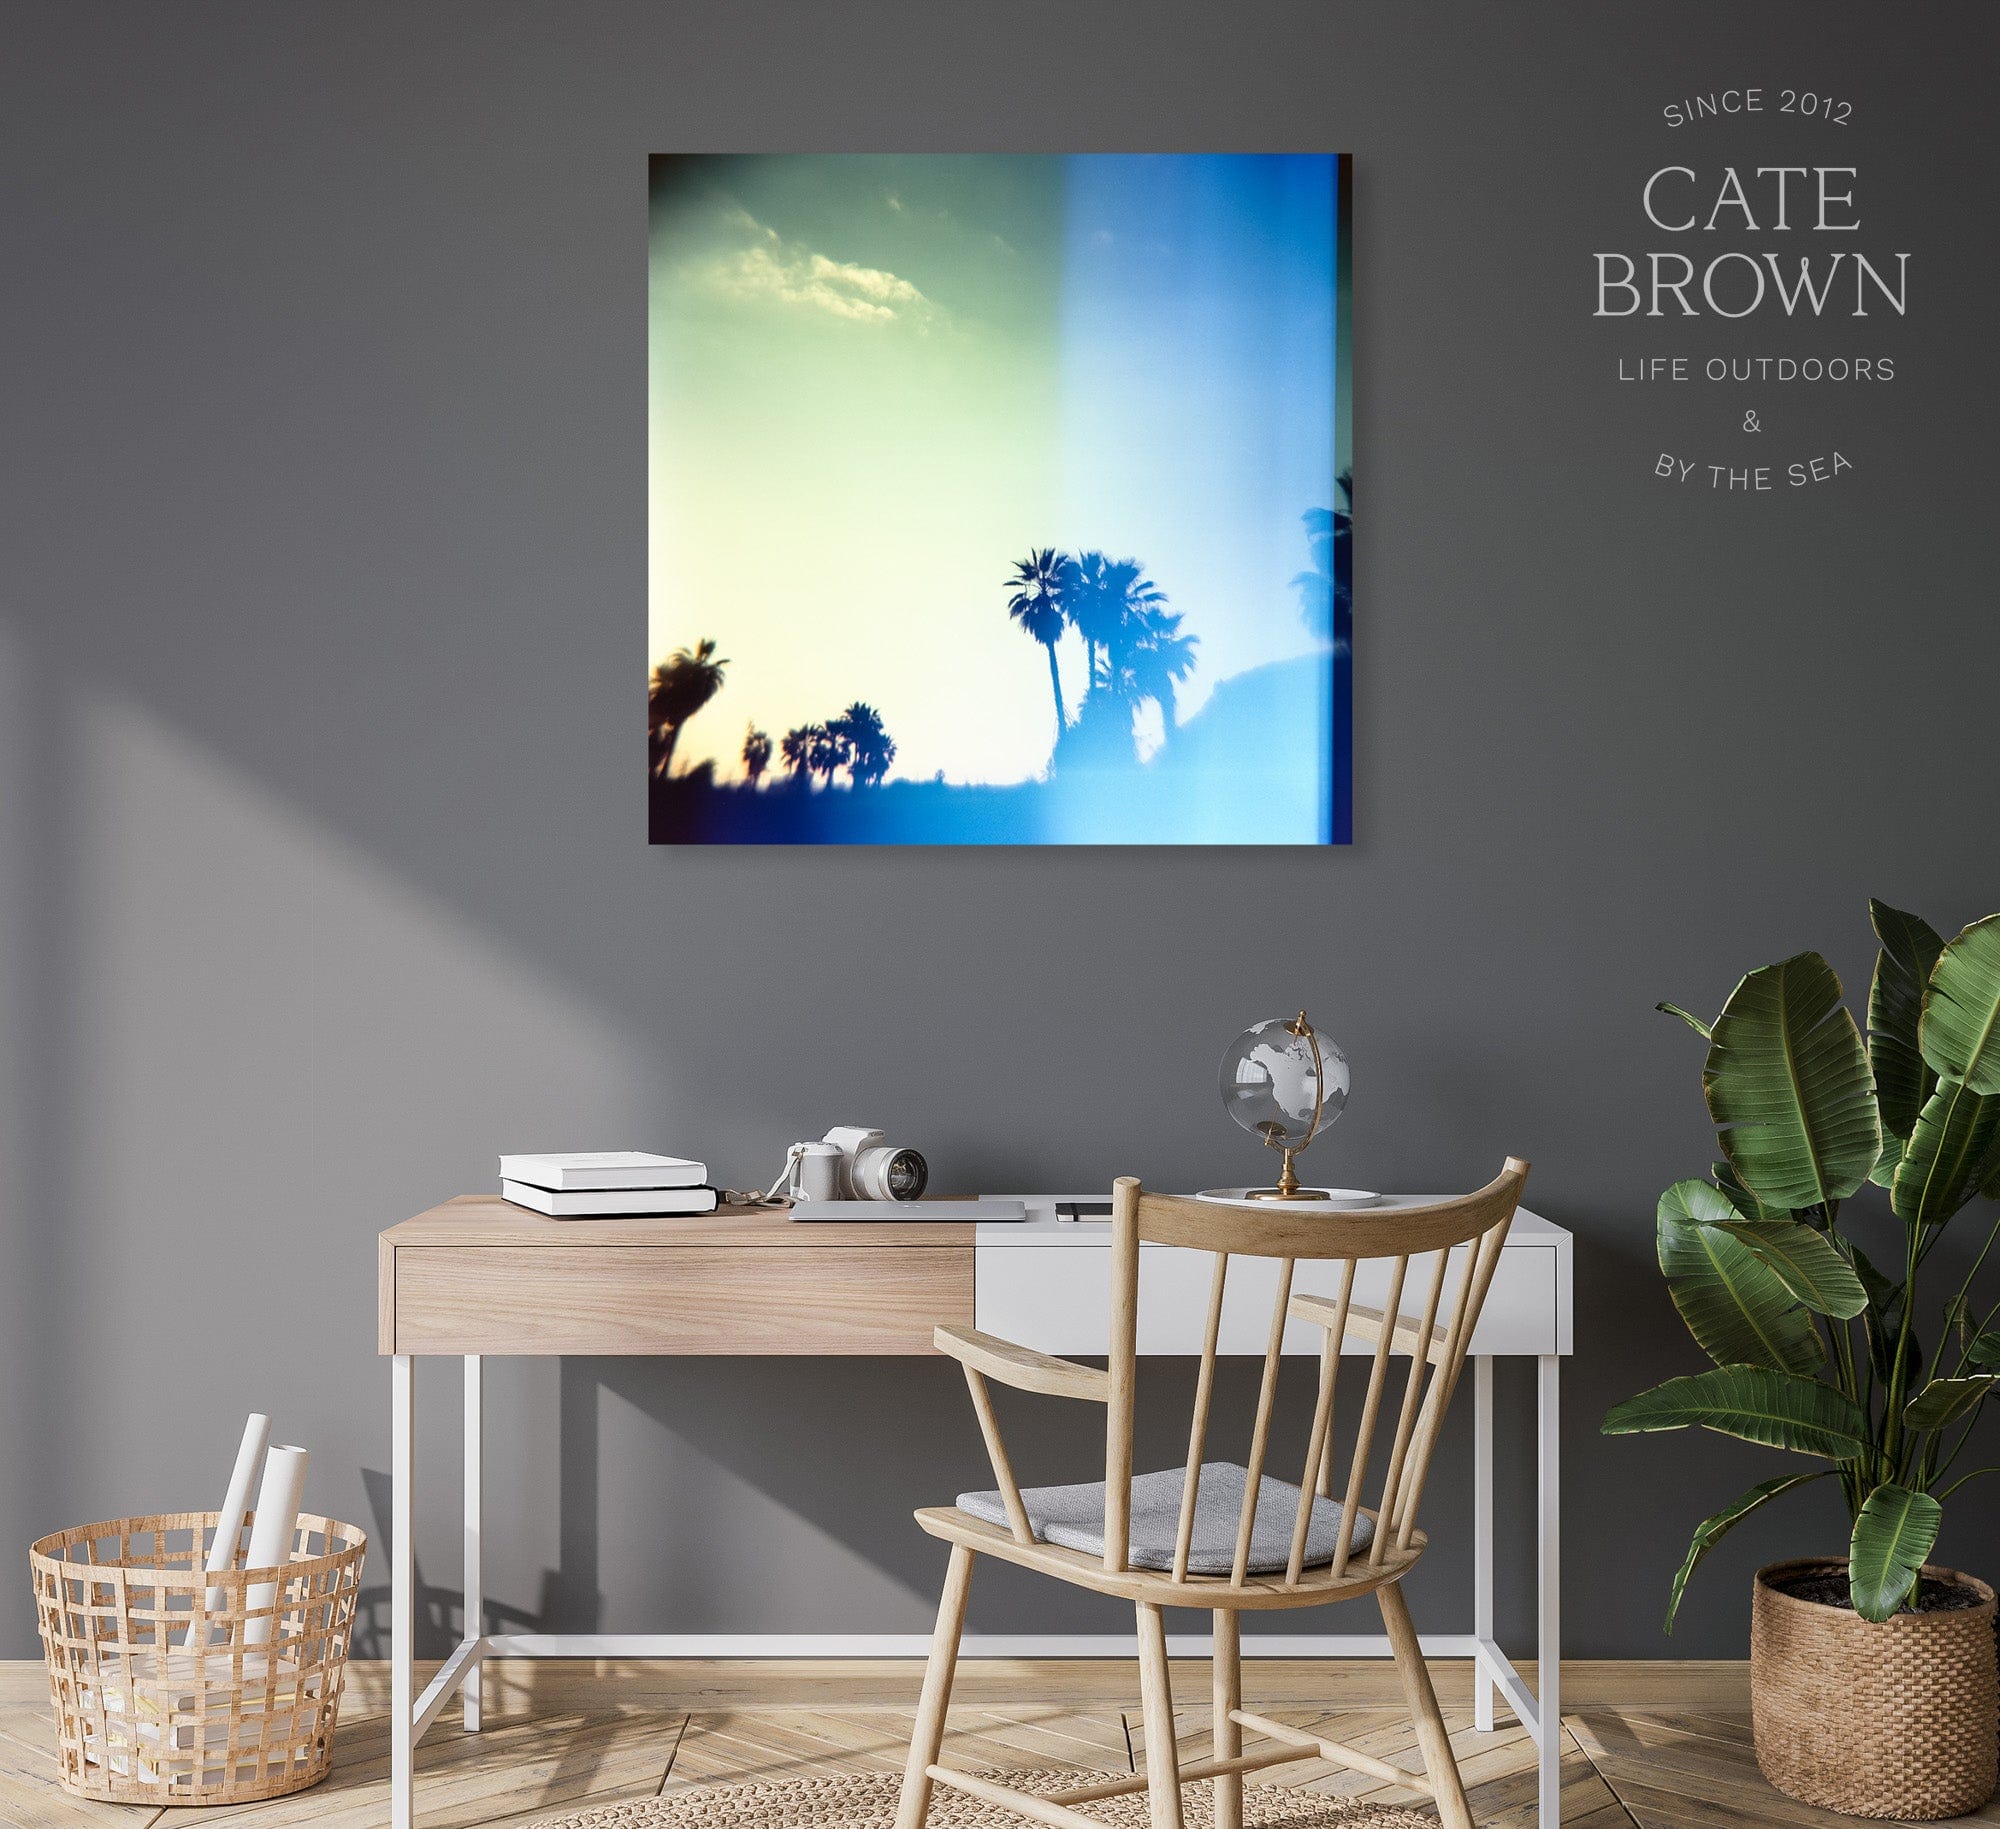 Cate Brown Photo Canvas / 16"x16" / None (Print Only) Baja Palms #2  //  Film Photography Made to Order Ocean Fine Art